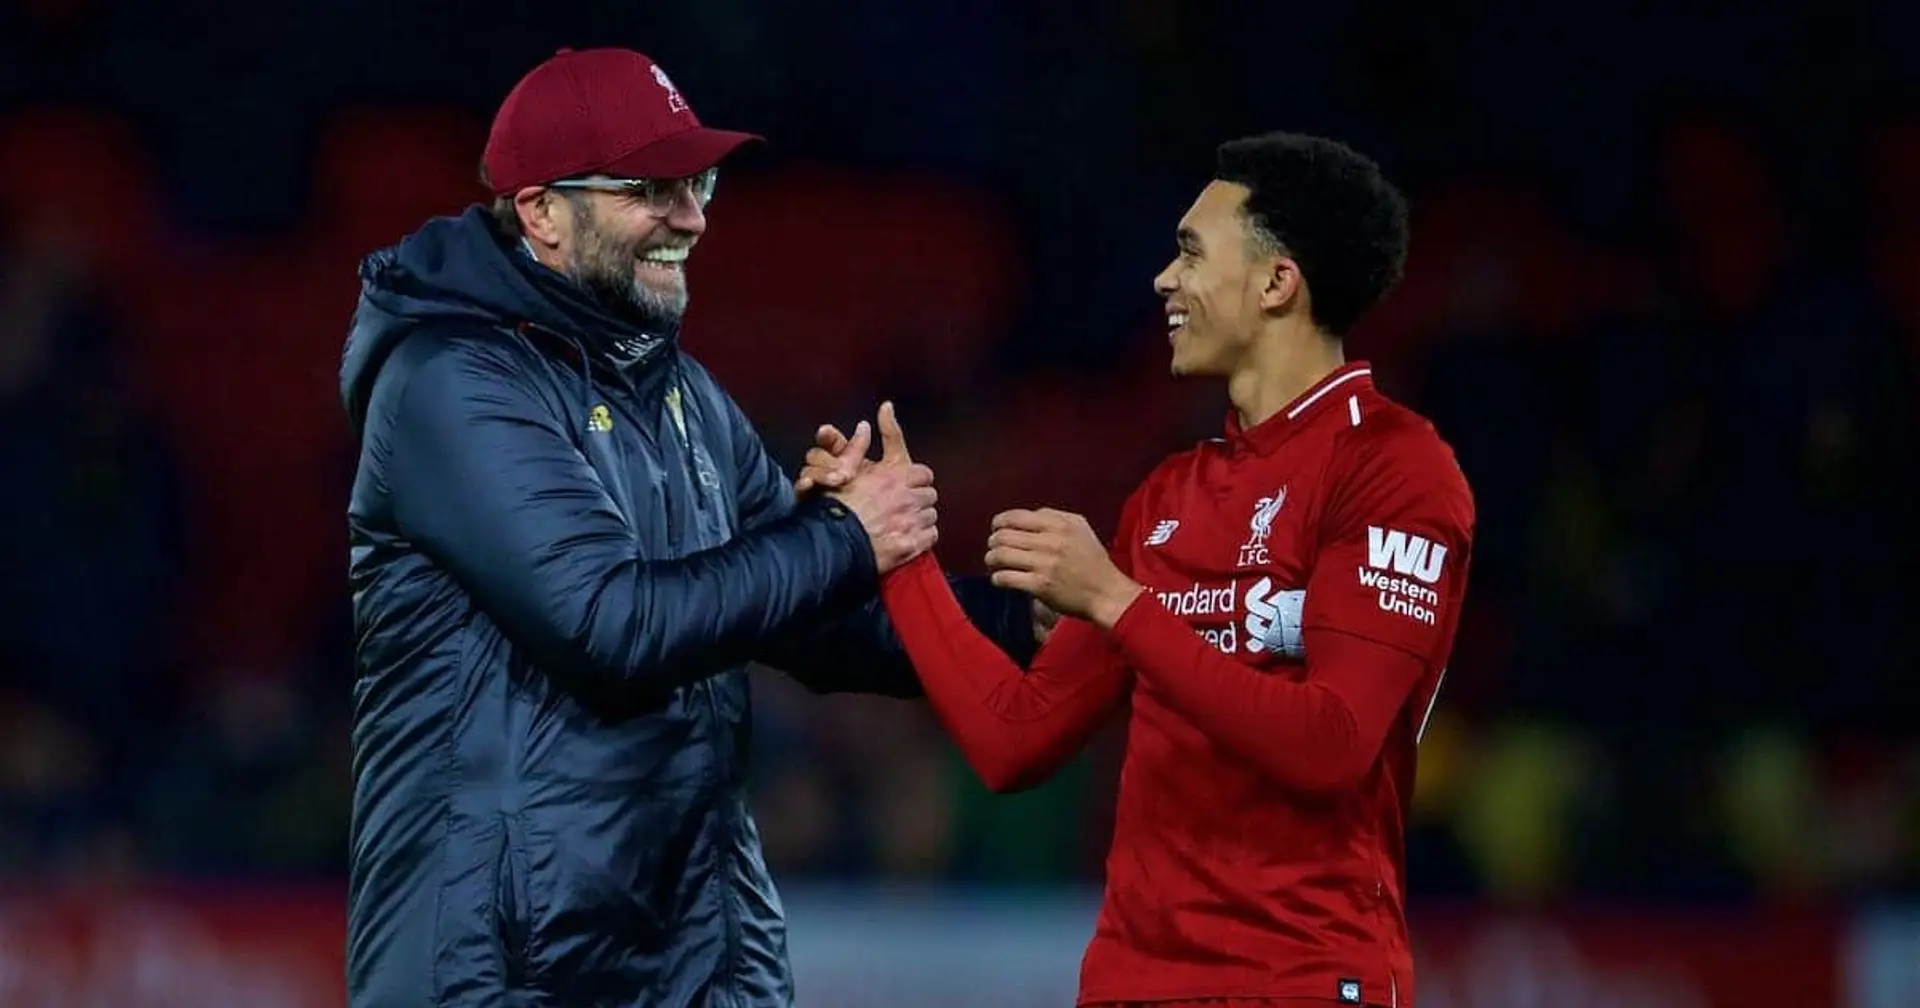 'Trent is already preparing himself to be the captain of Liverpool in the future': Klopp praises right-back's leadership mentality 